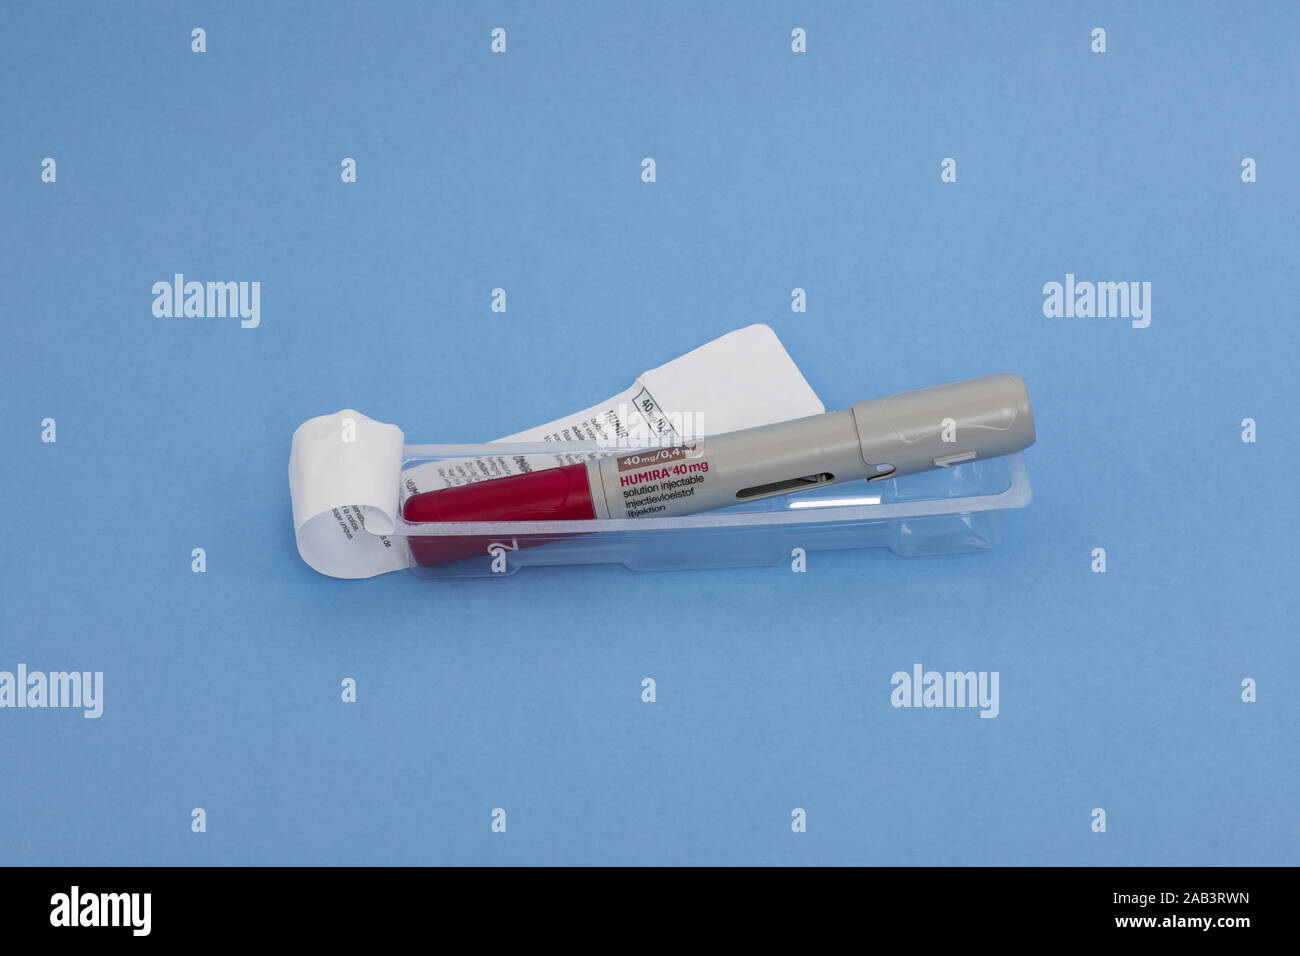 Eindhoven, the Netherlands, 12th November 2019. Humira, adalimumab. An open package containing a pen with a needle for a patient to inject themselves Stock Photo